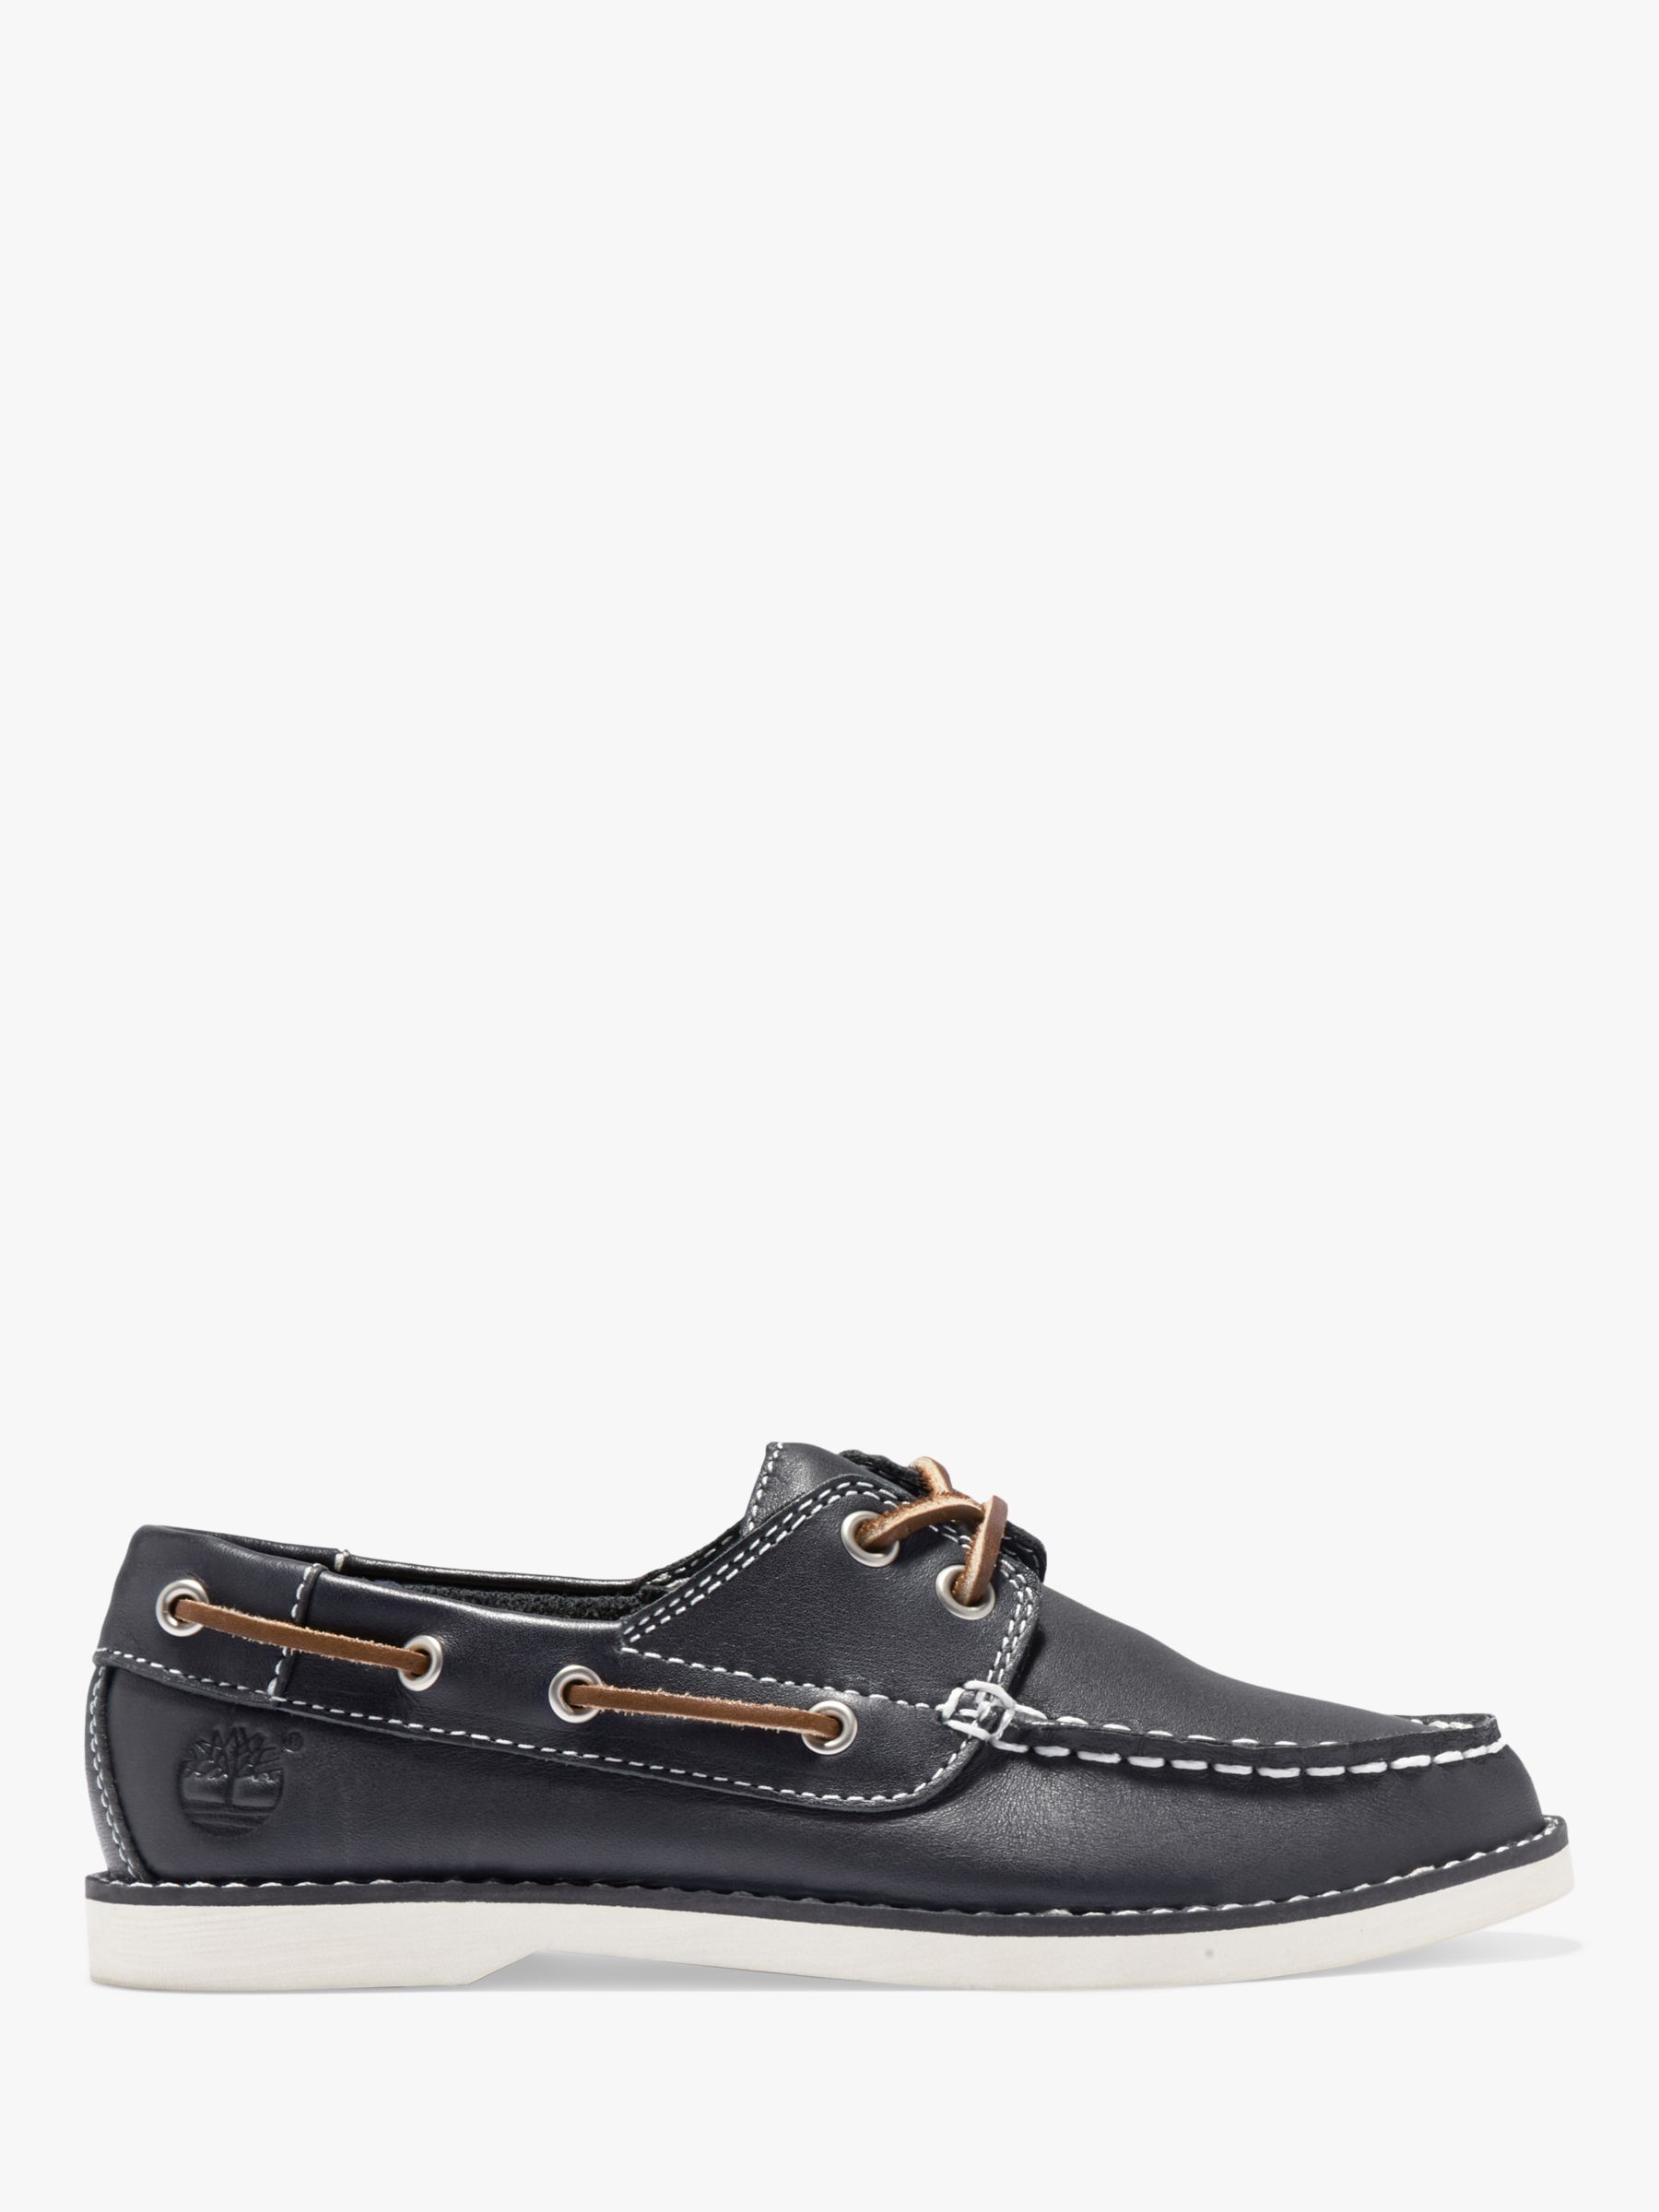 boys timberland boat shoes